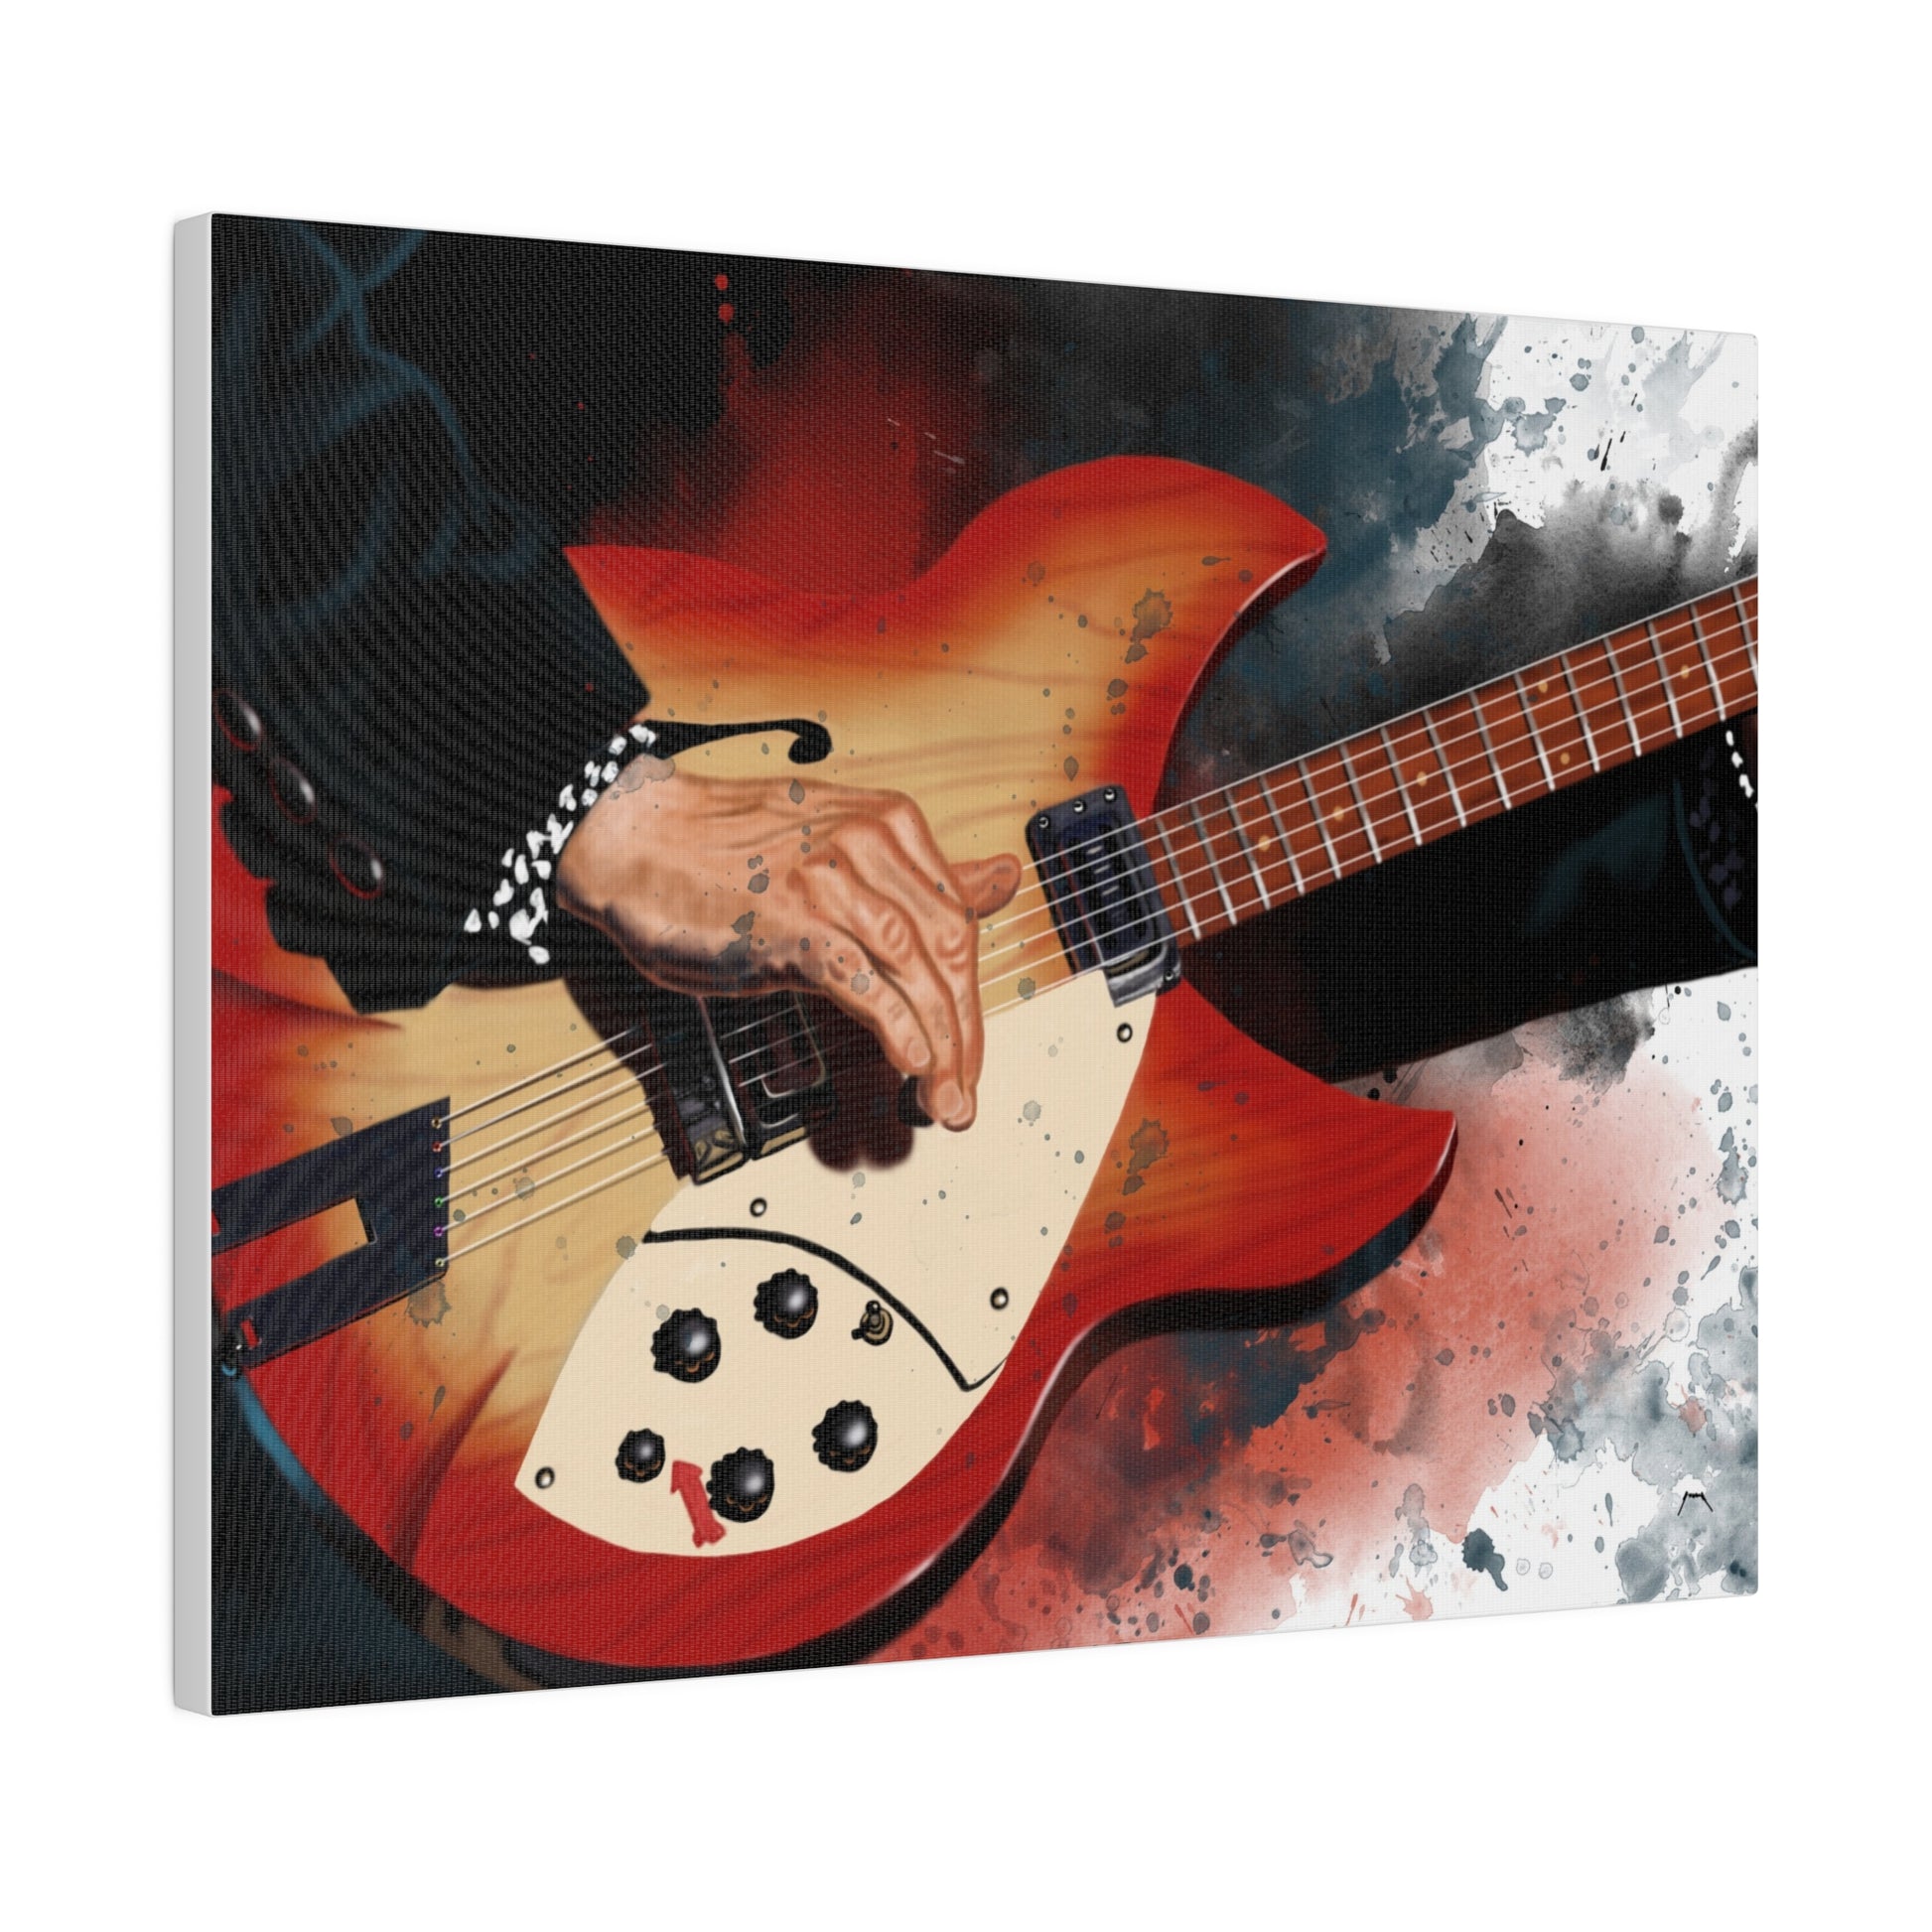 Digital painting of Tom's guitar printed on canvas